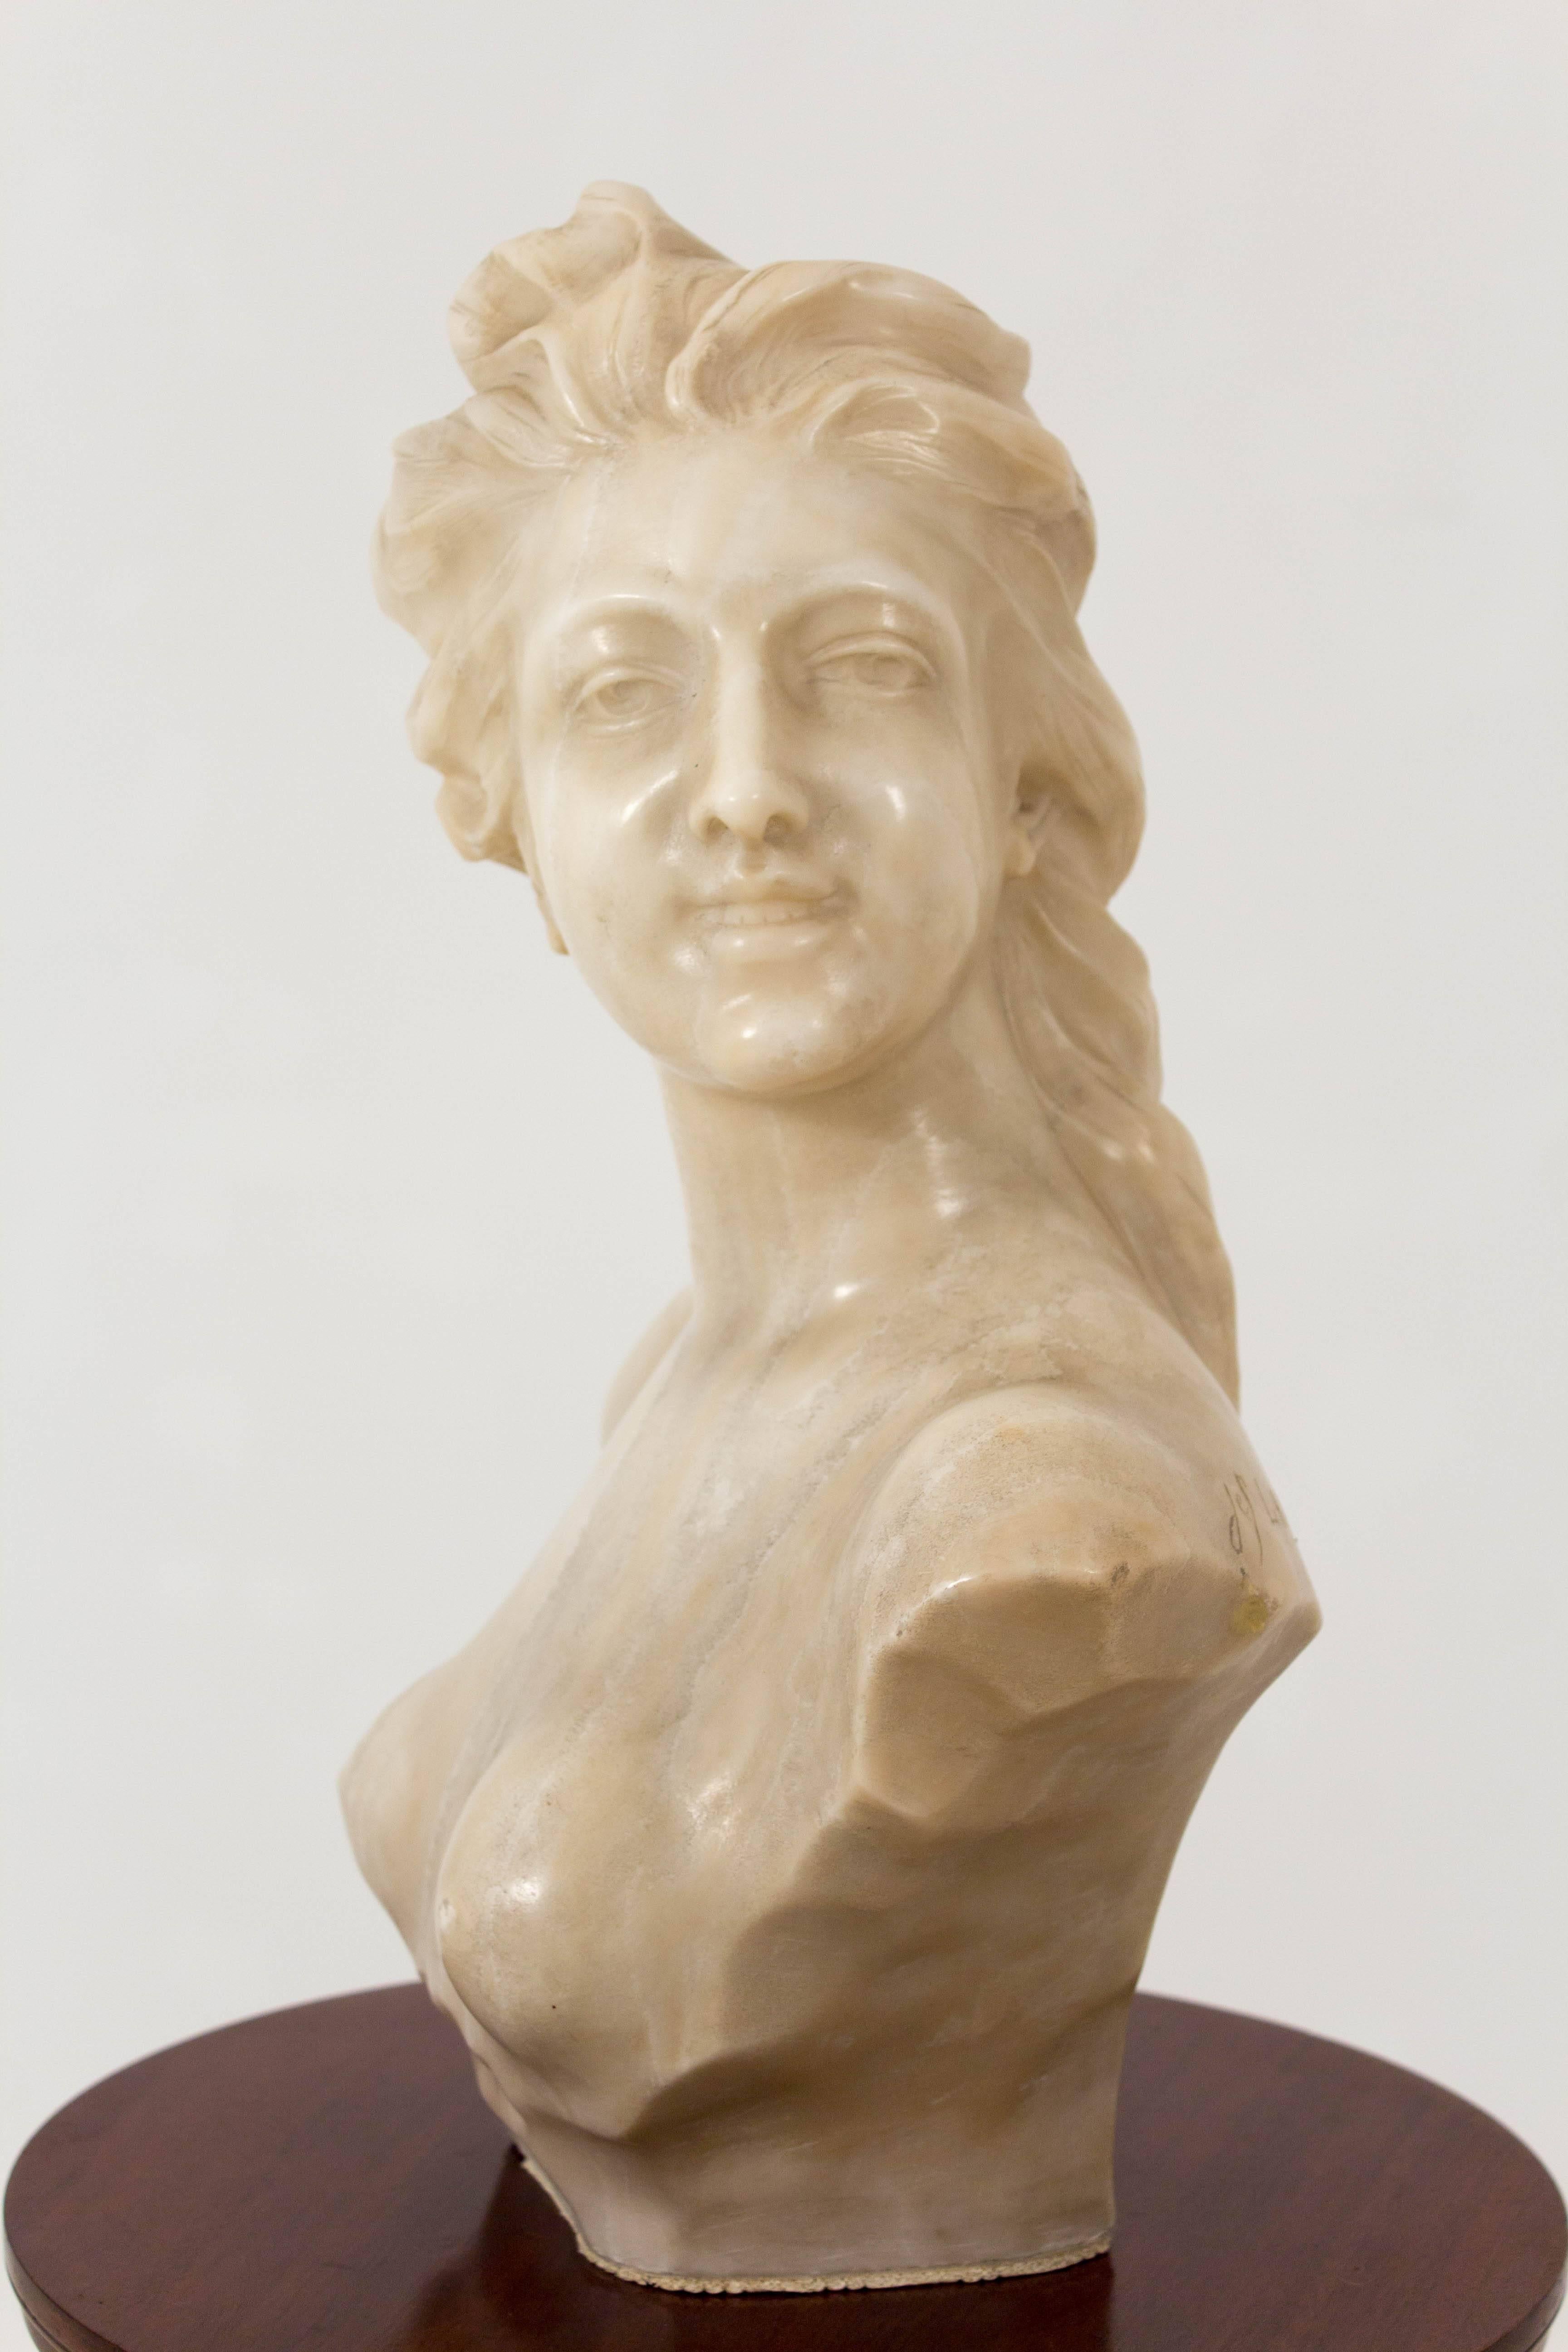 Belgian Stunning Art Nouveau Bust of Young Lady by Jef Lambeaux